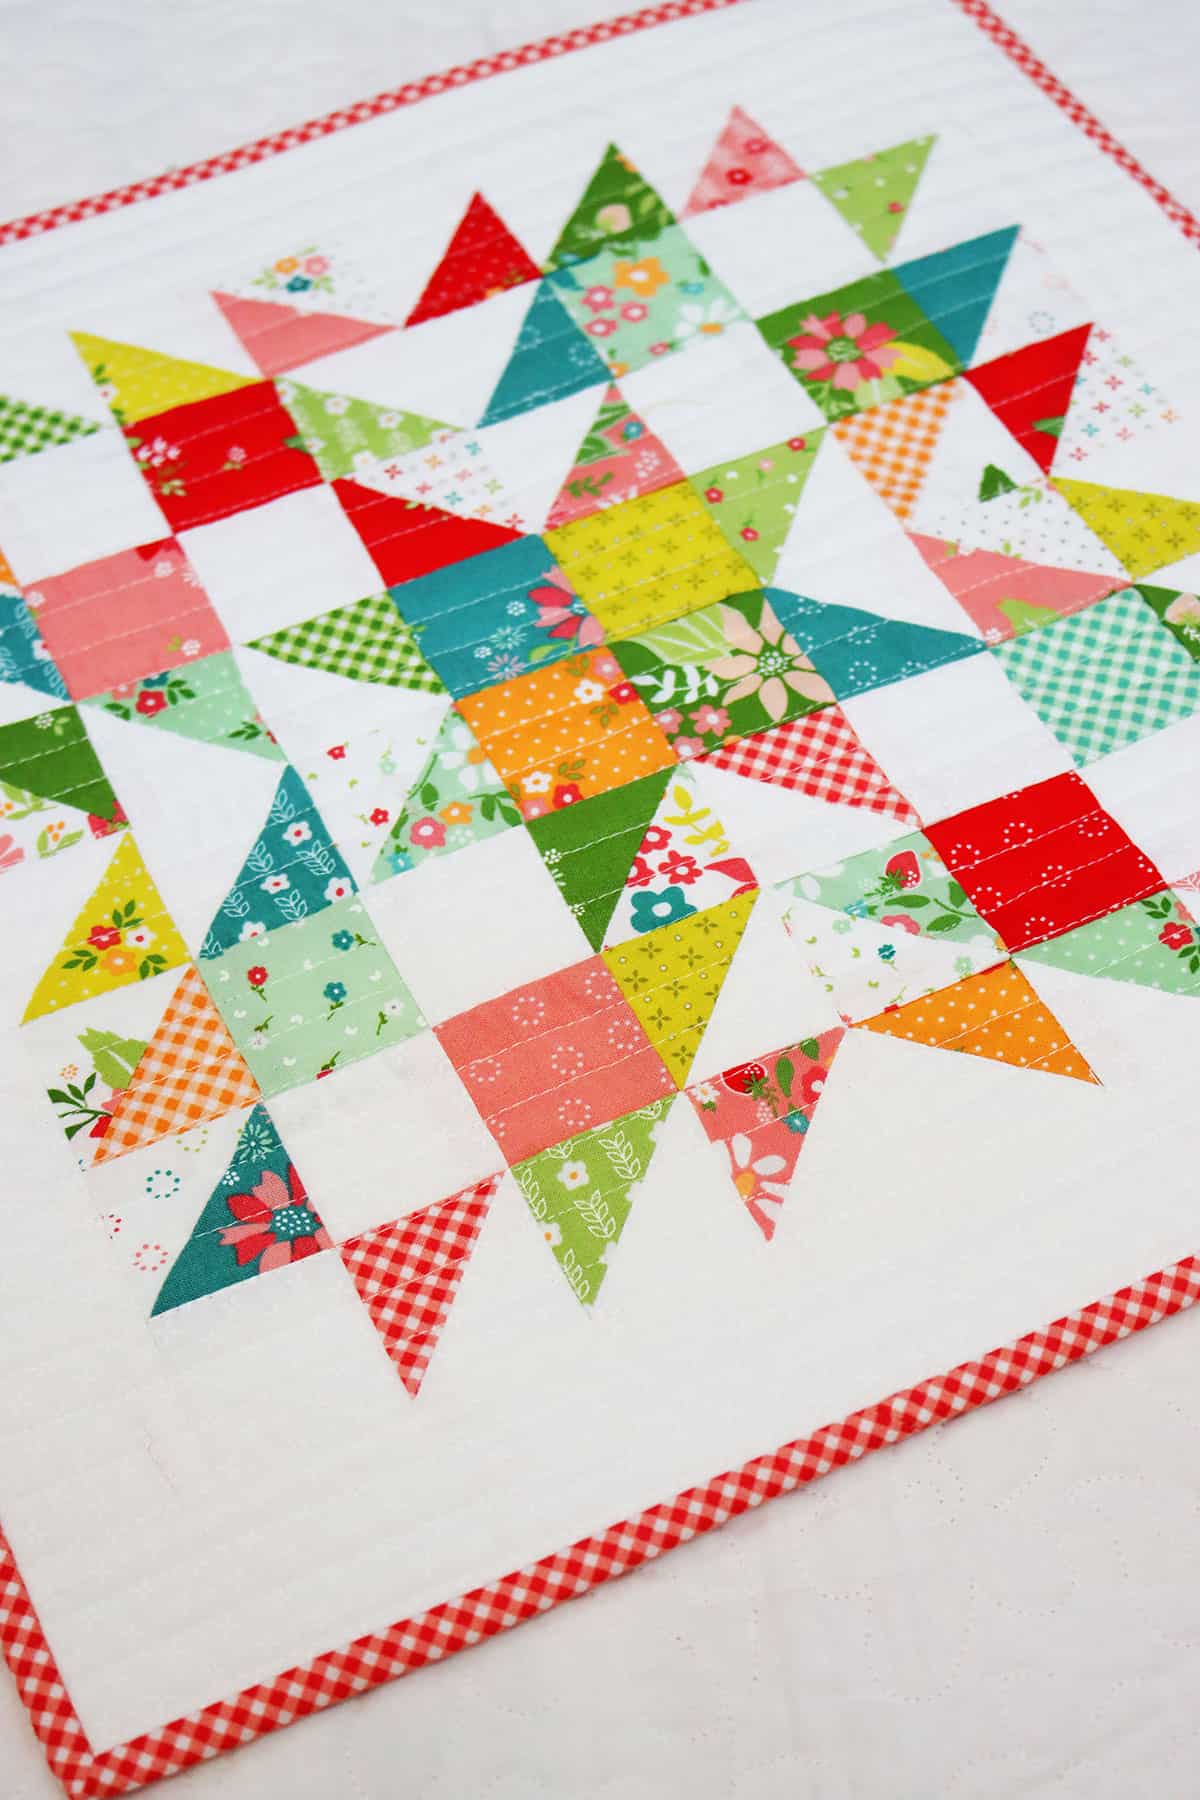 Summer Star Medley & More with Strawberry Lemonade fabric featured by Top US Quilt Blog, A Quilting Life